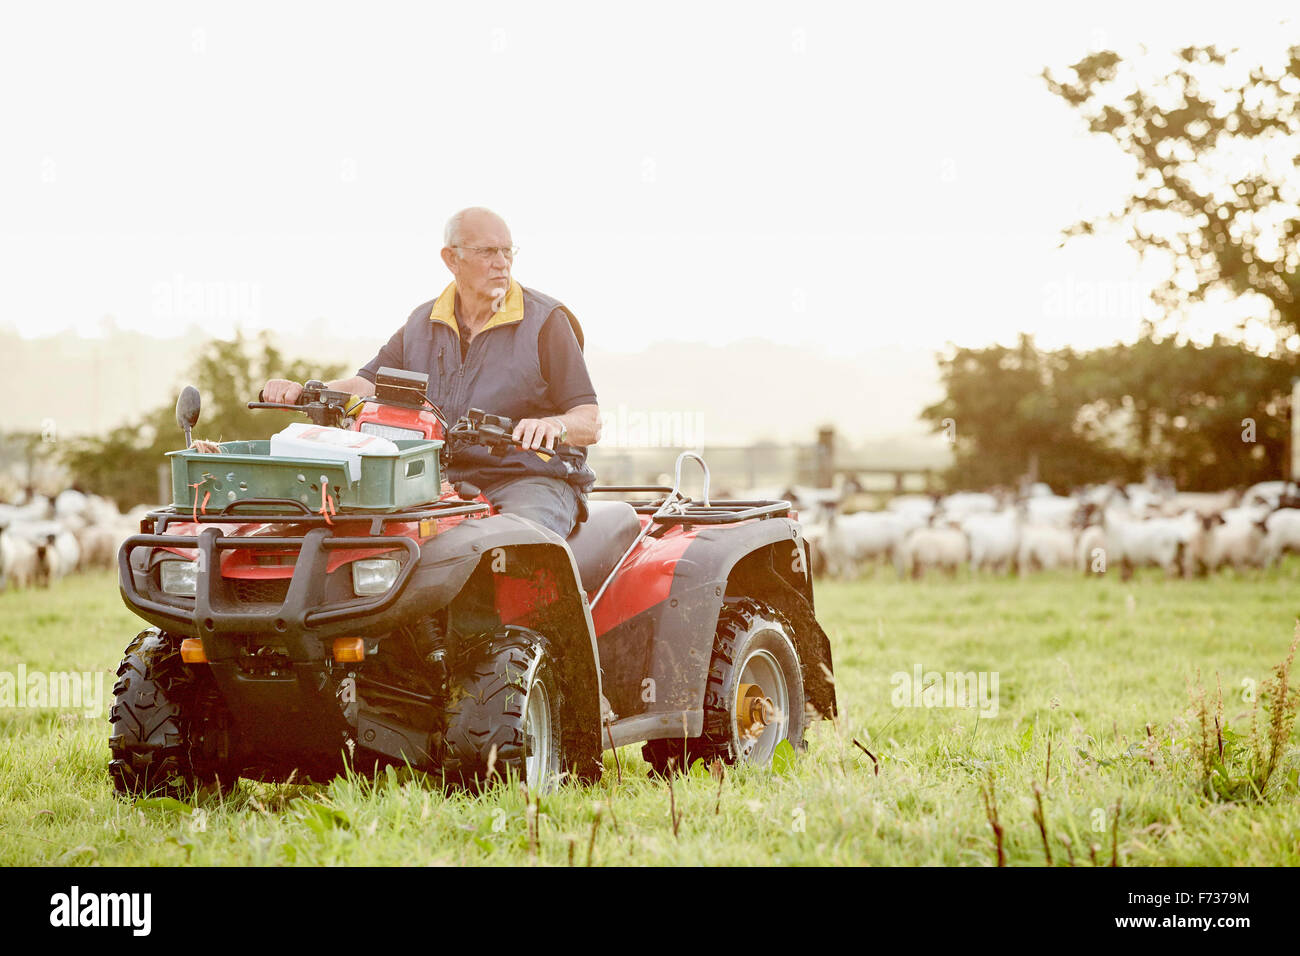 A farmer on a quadbike in a field, with a large flock of sheep behind him. Stock Photo